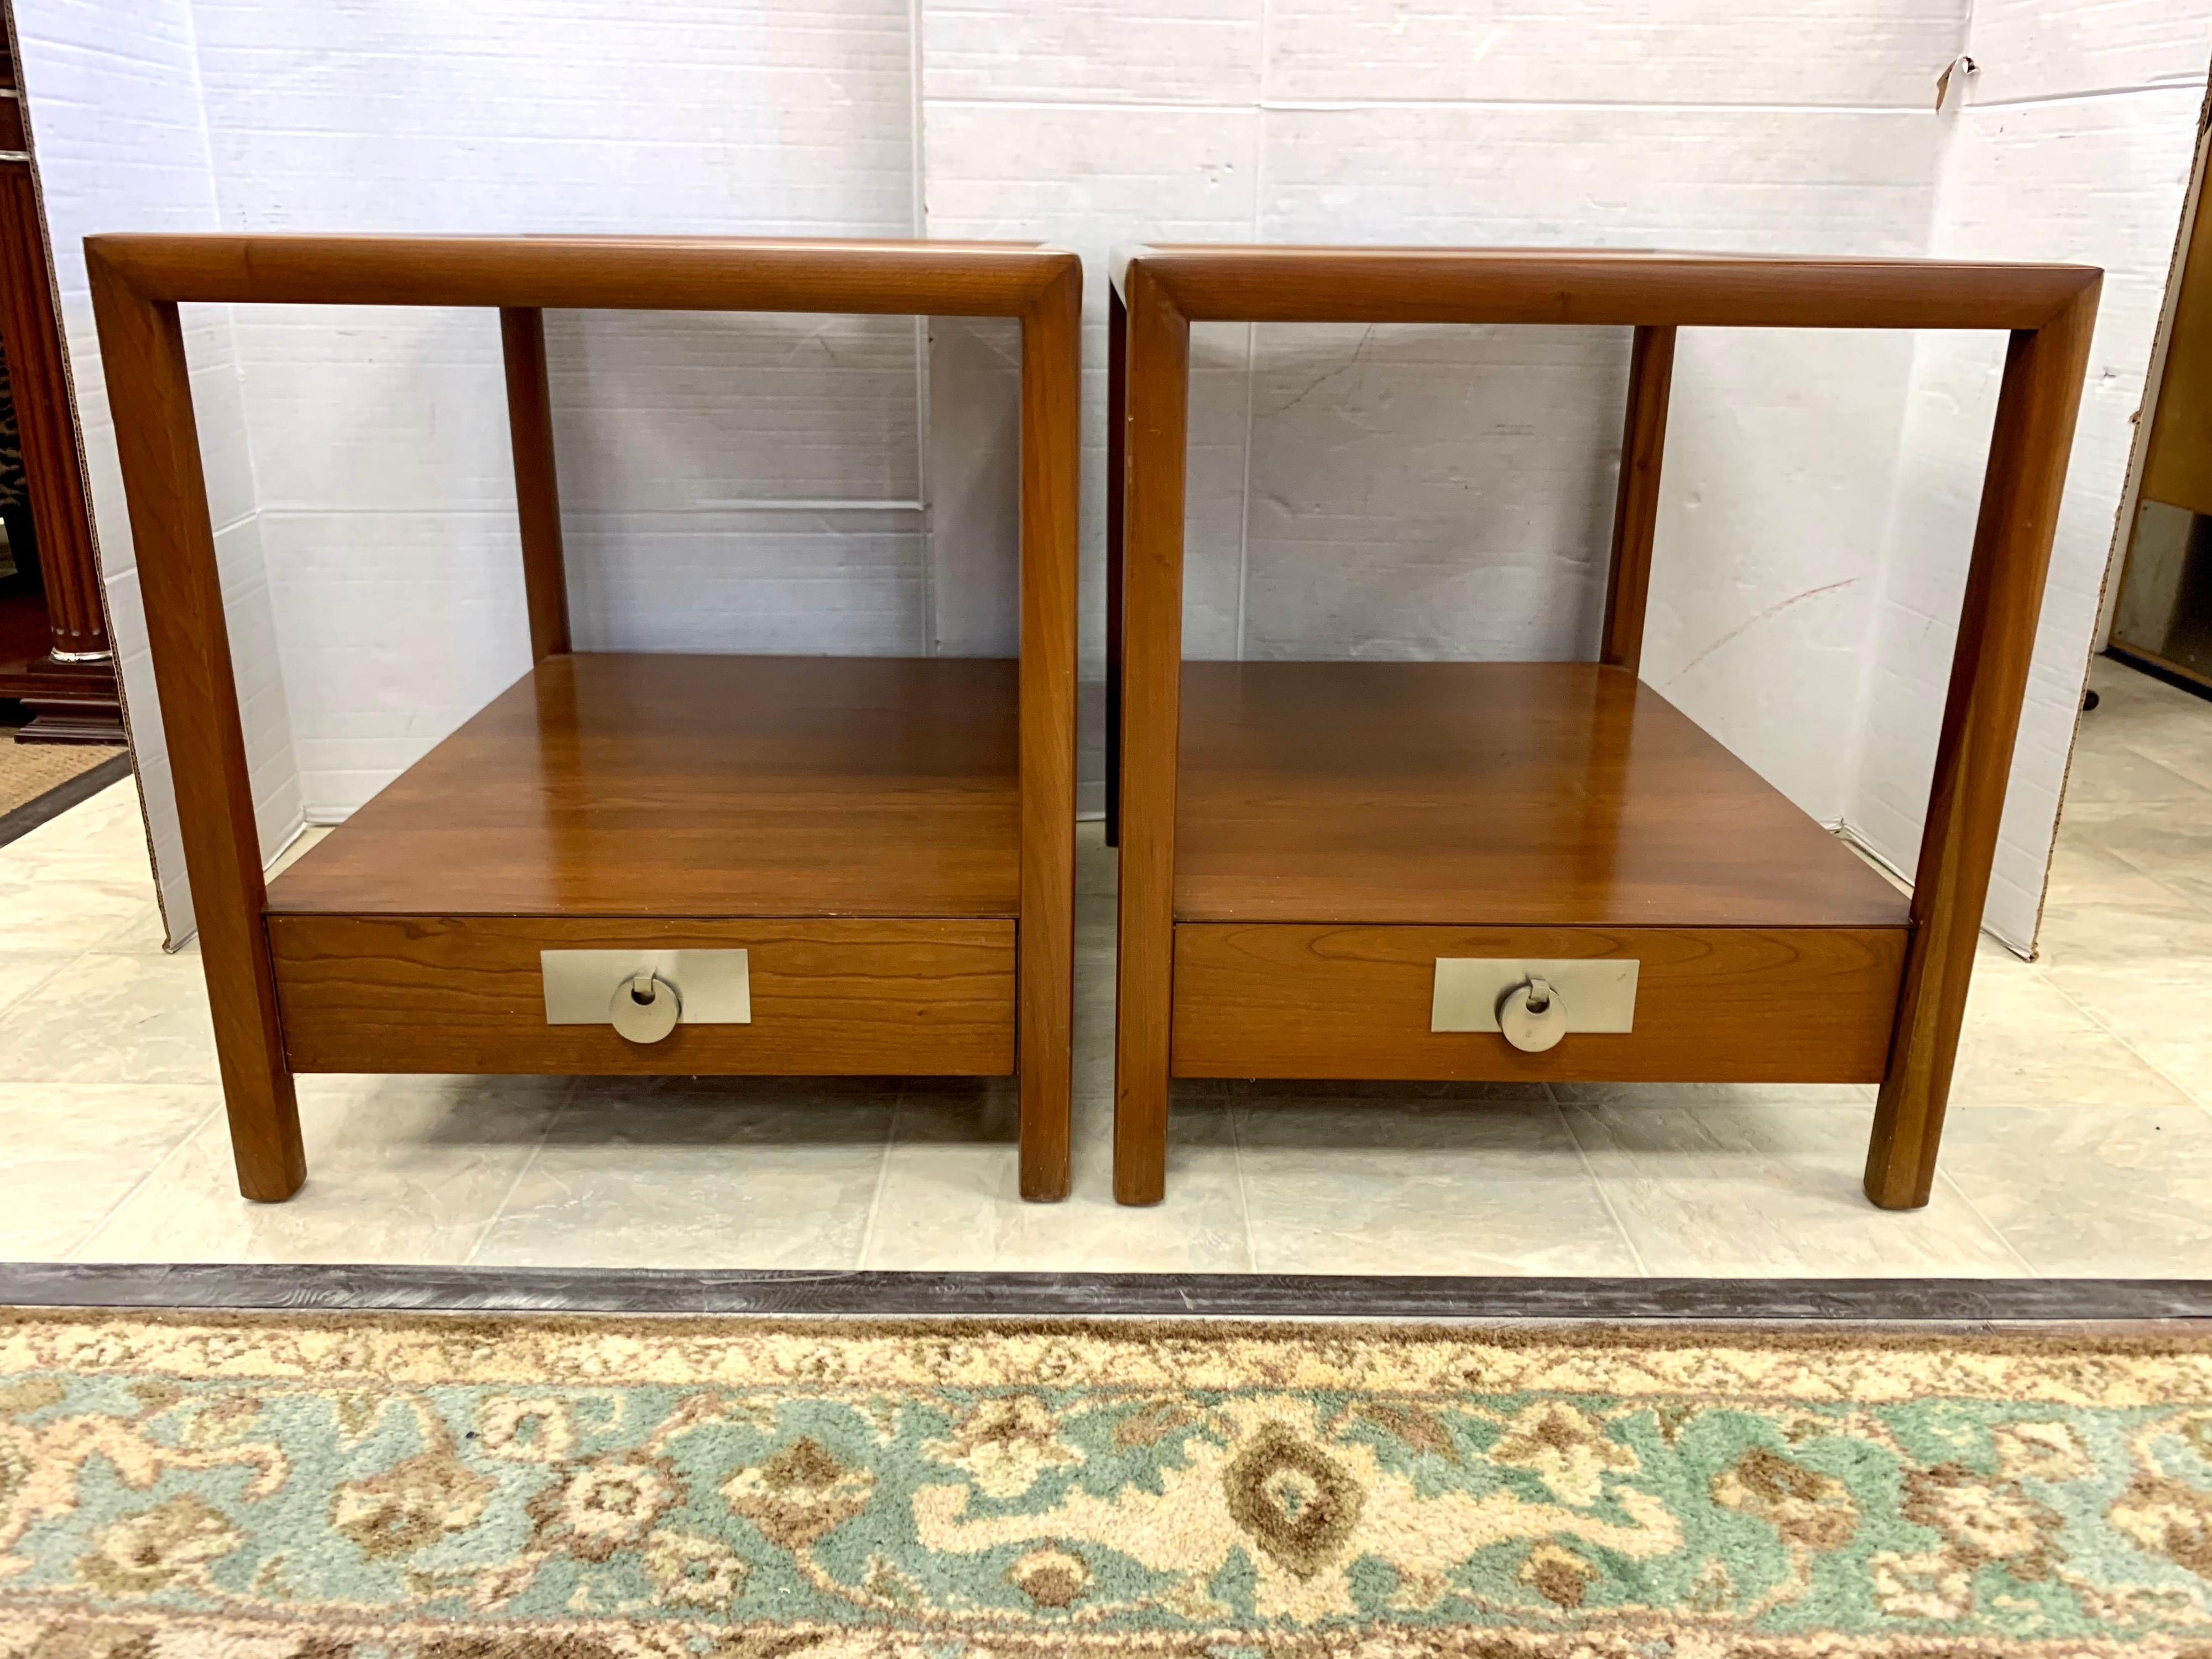 Rare matching pair of rectangular lamp tables by Michael Taylor for Baker Furniture’s iconic New World collection. Dimensions are below. All manufacturer hallmarks present. Price is for the pair, why pay $15,000.00 and up?